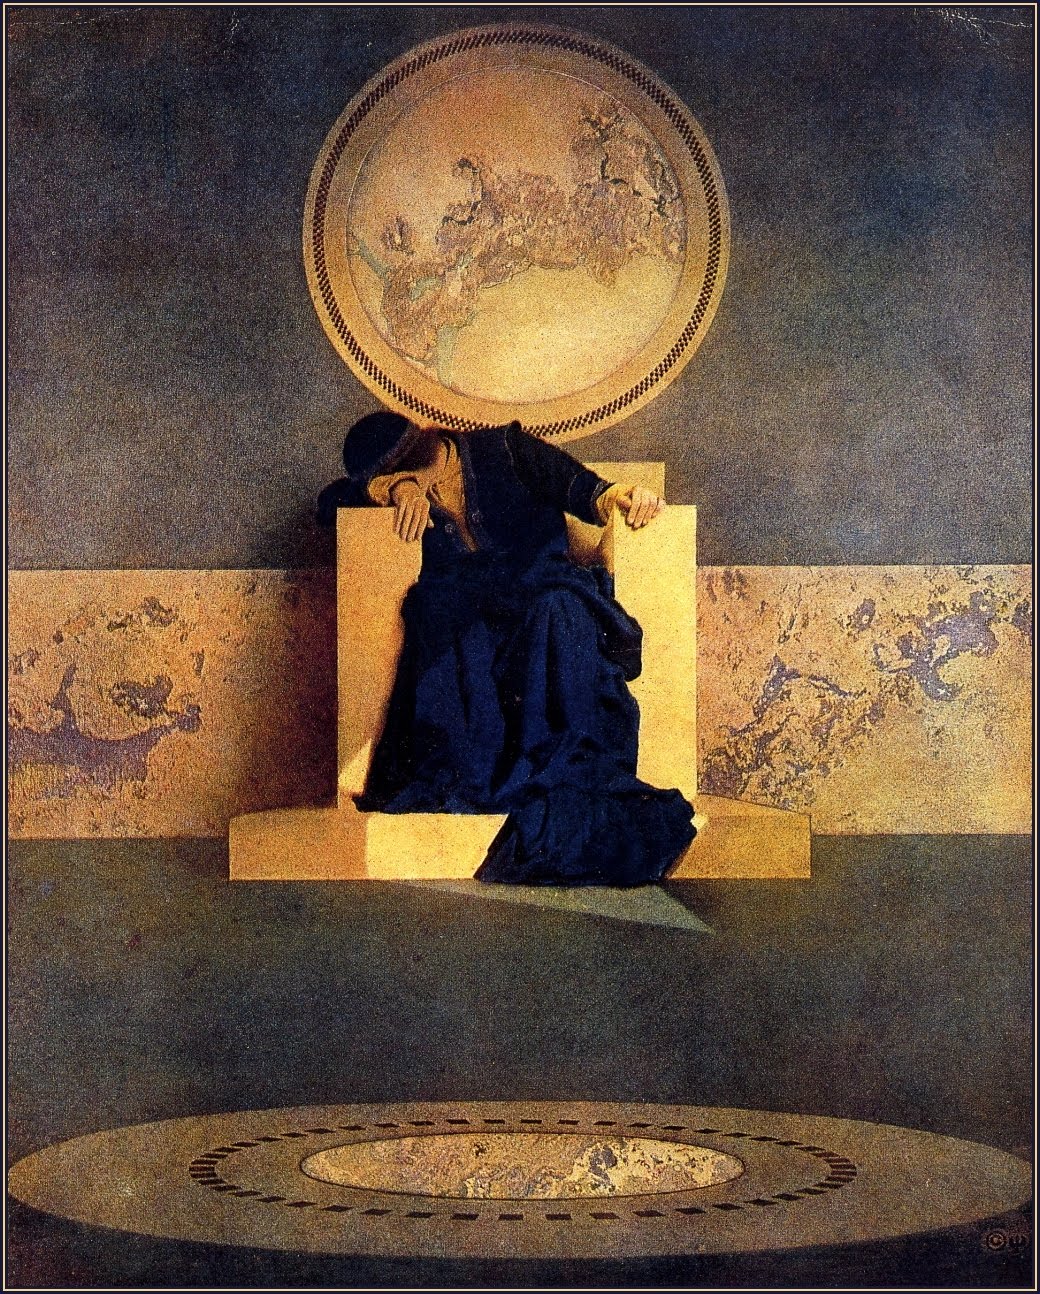 see: https://www.myddoa.com/young-king-of-the-black-isles-maxfield-parrish/